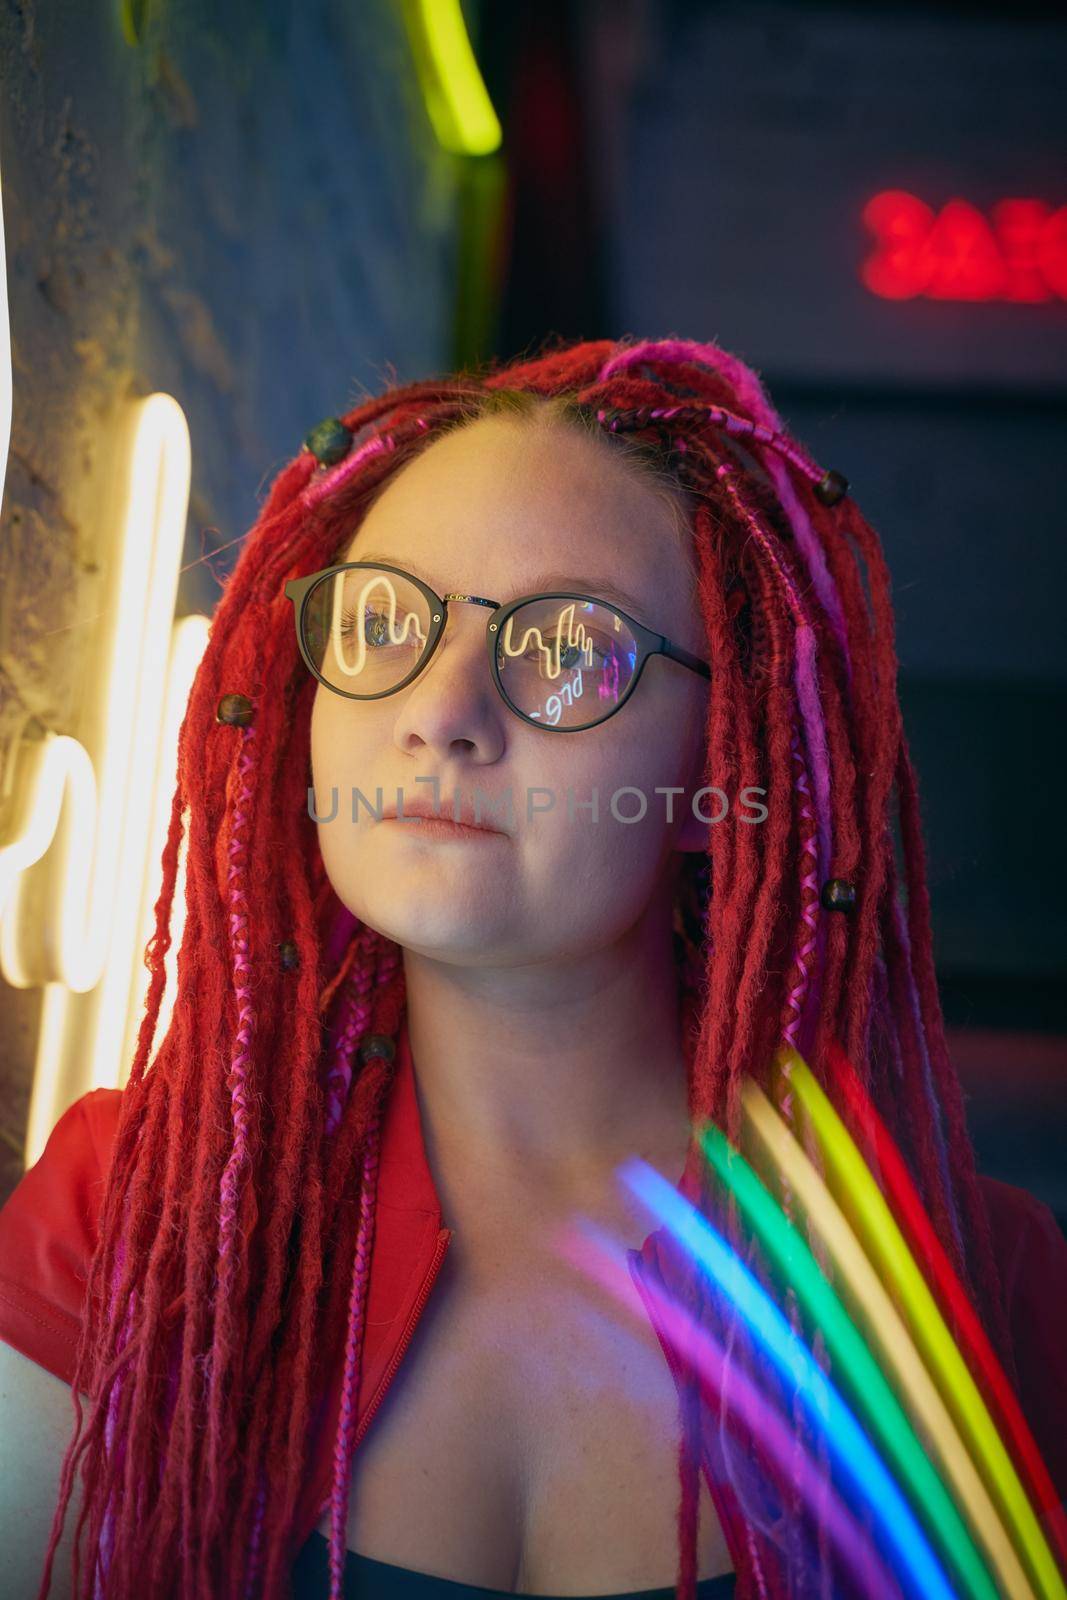 Girl in neon lights at party in nightclub, beautiful woman in sunglasses, with long pink hair, with dreadlocks pigtails, bright and stylish in the glow of neon signs, vertical, close up